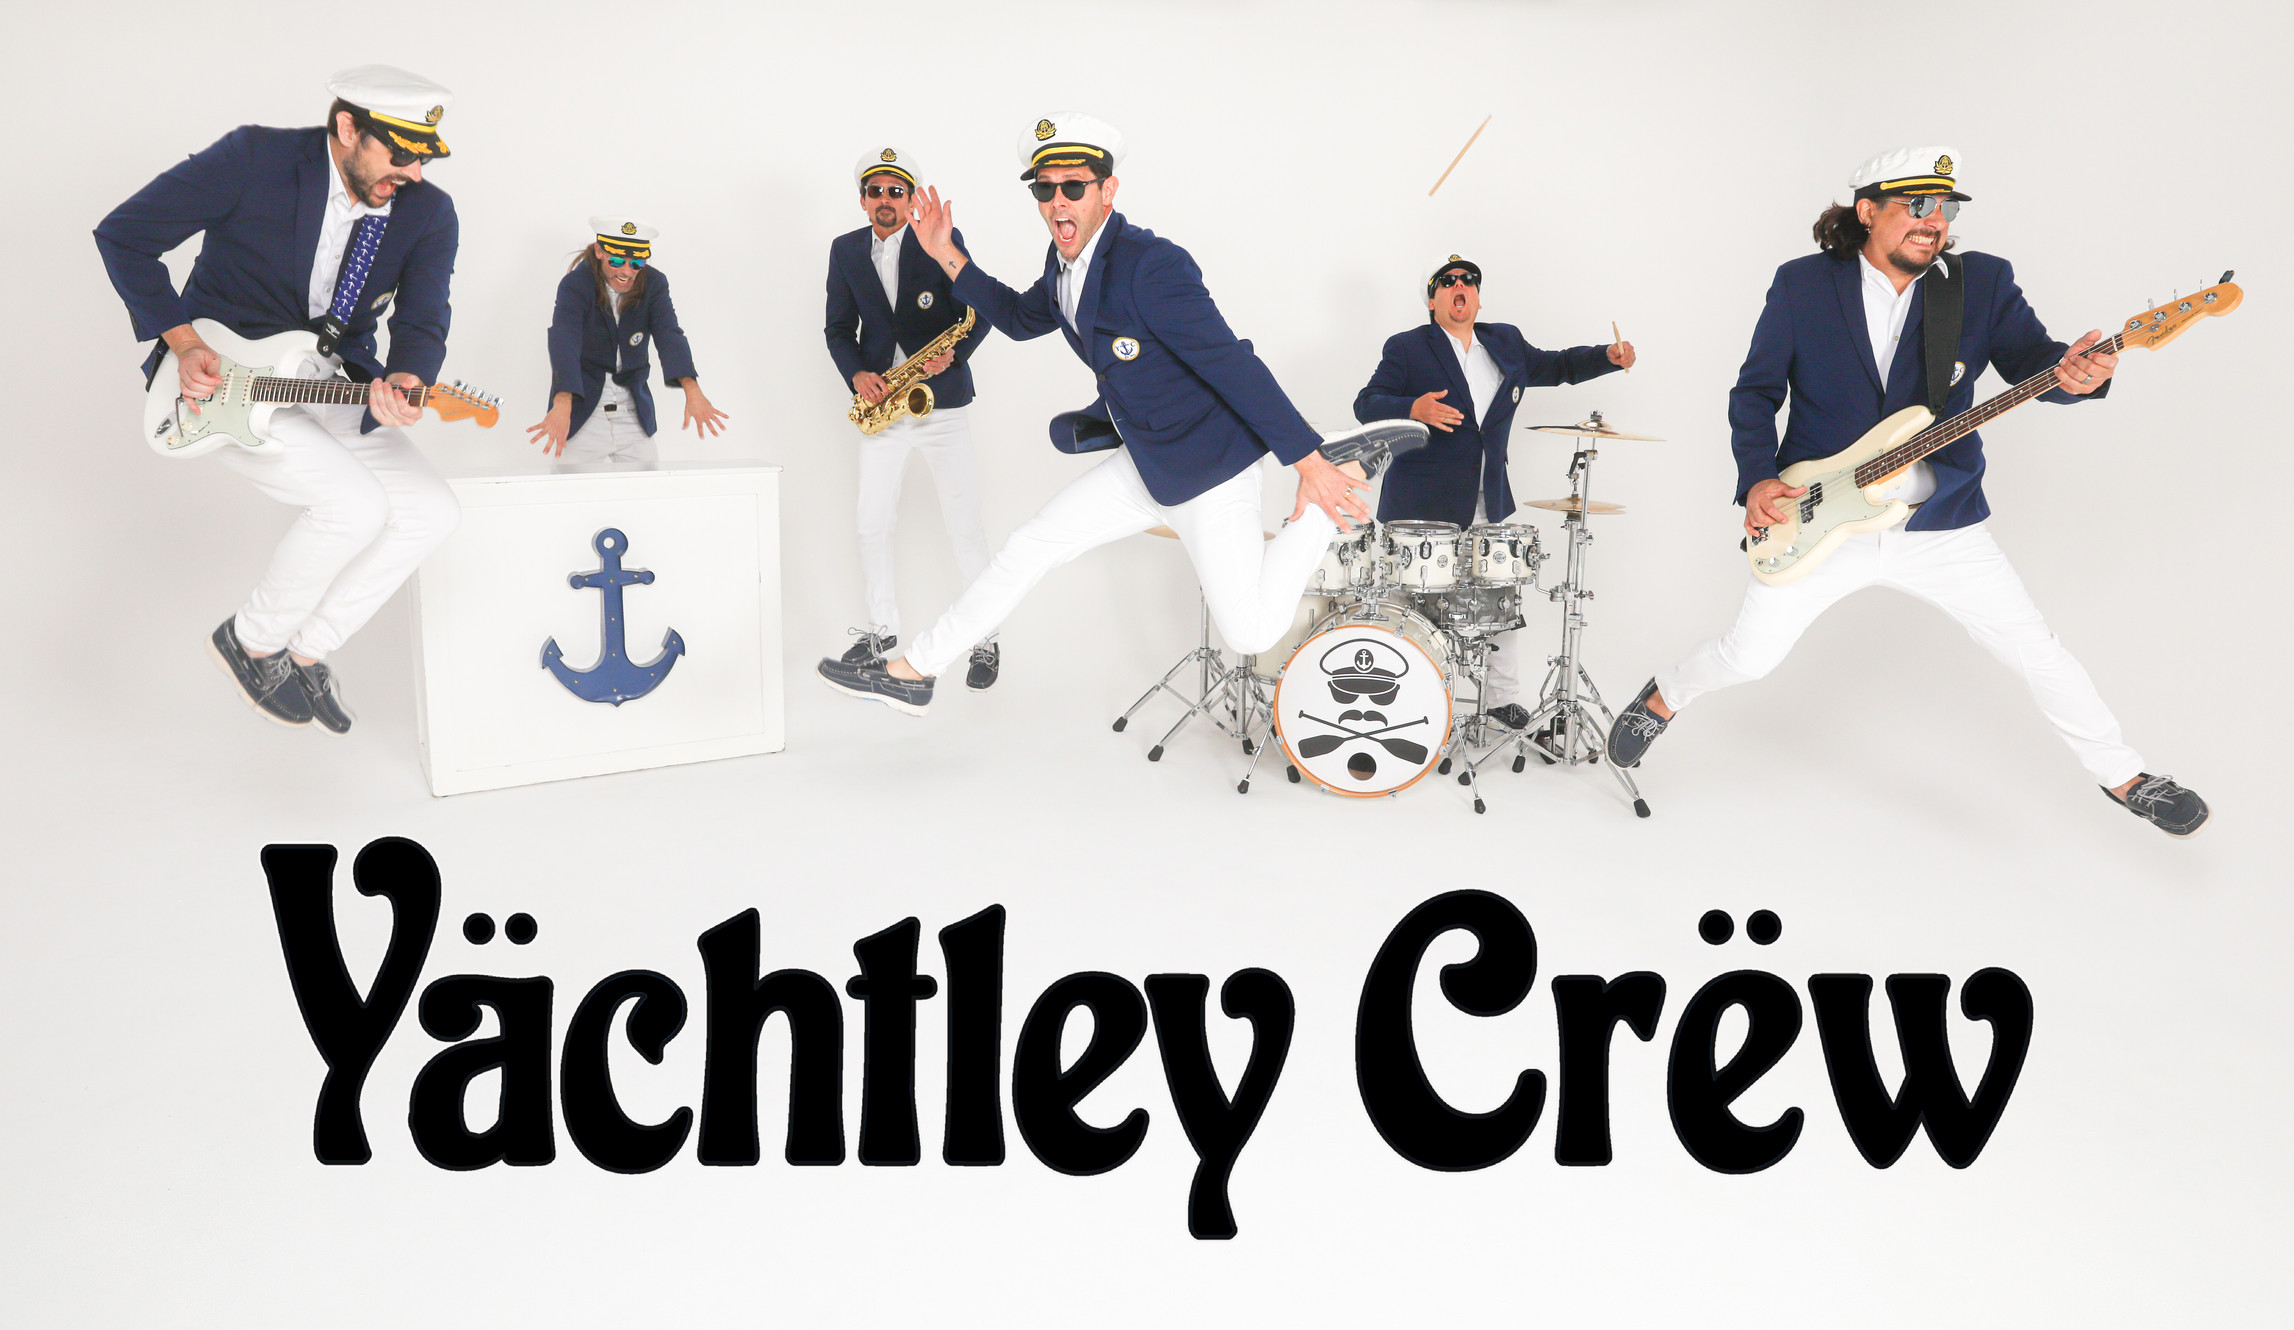 Buy tickets to Yachtley Crew in Roseville on April 26, 2024